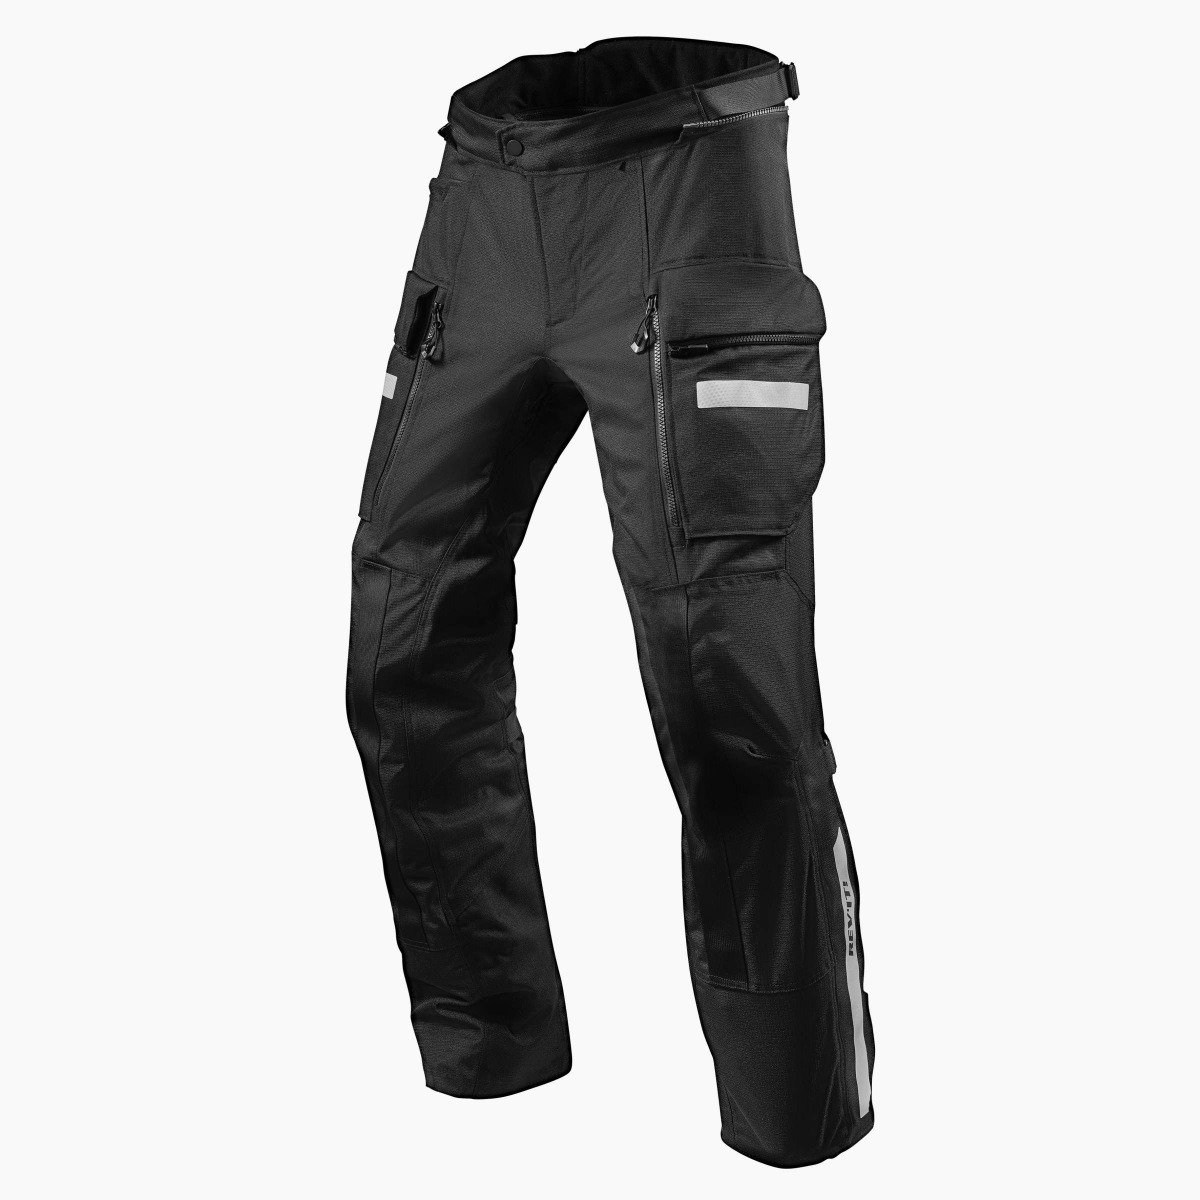 Image of REV'IT! Sand 4 H2O Standard Black Motorcycle Pants Size XS ID 8700001316231